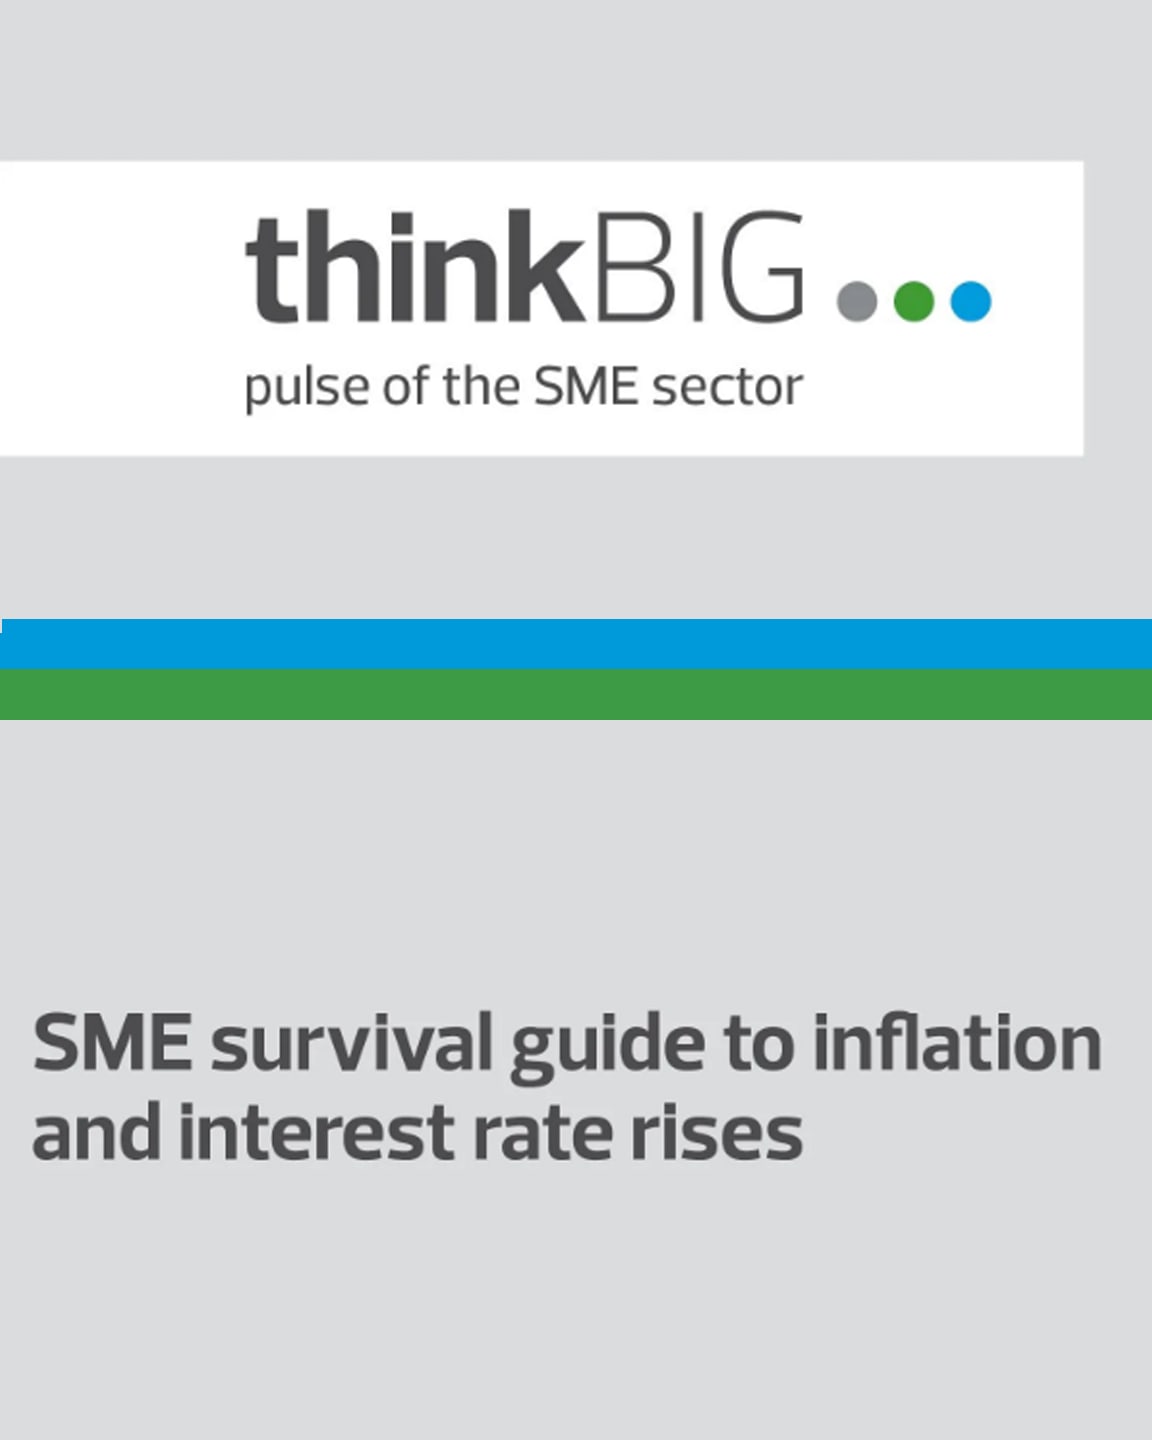 thinkBIG: SME survival guide to inflation and interest rate rises